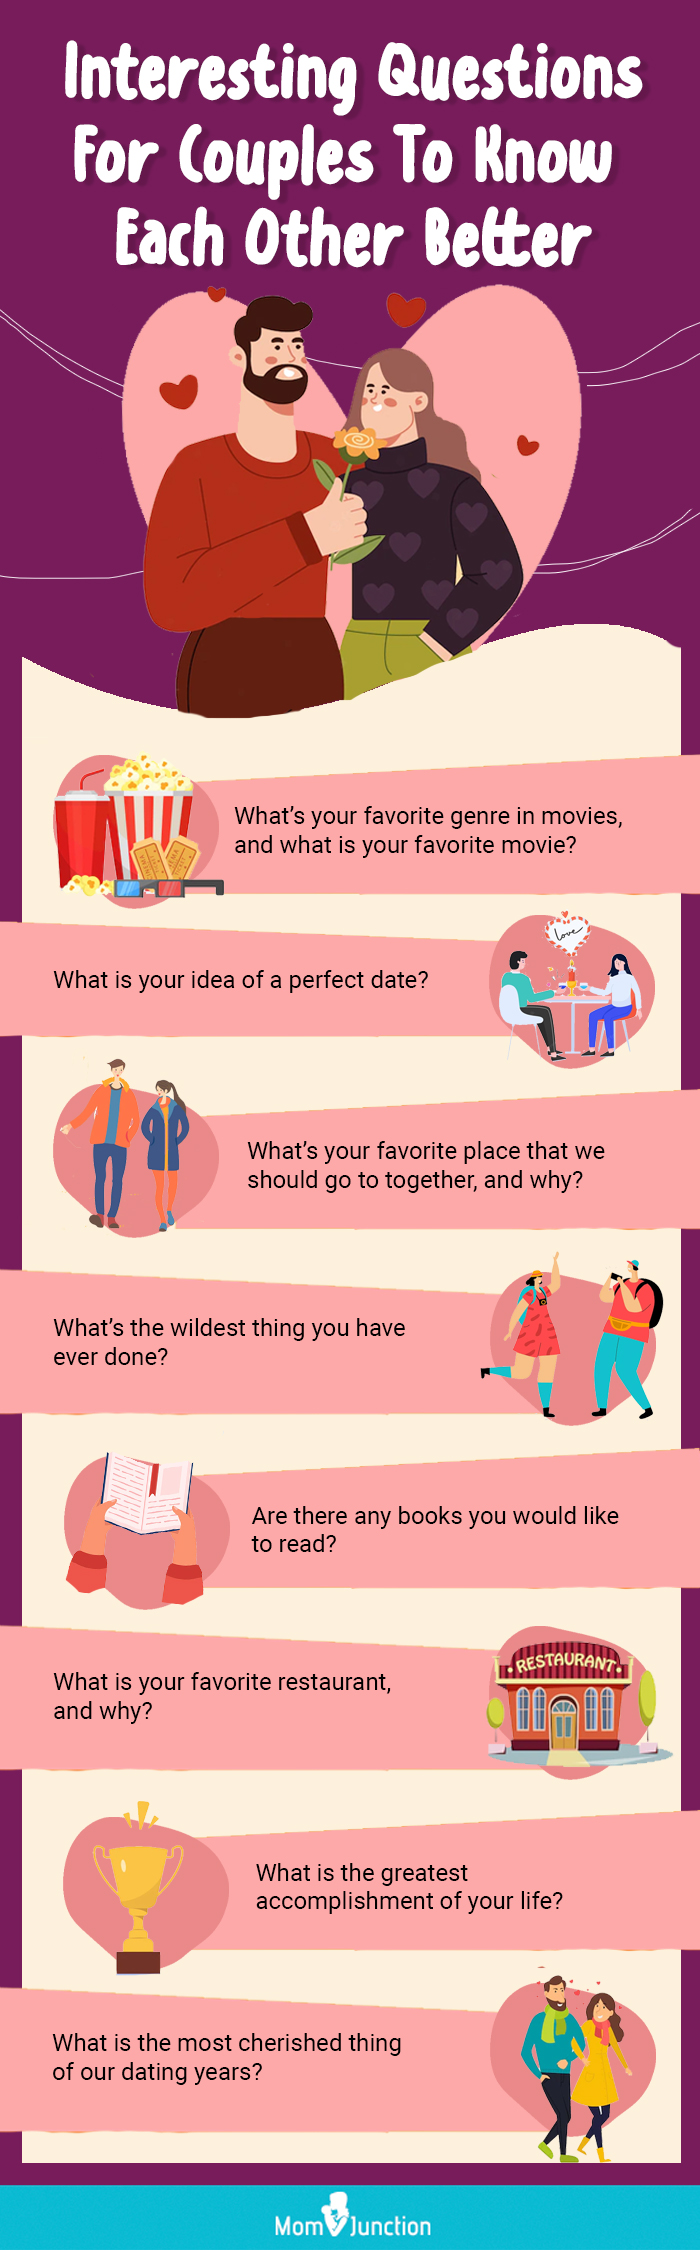 Questions to ask celeb couples